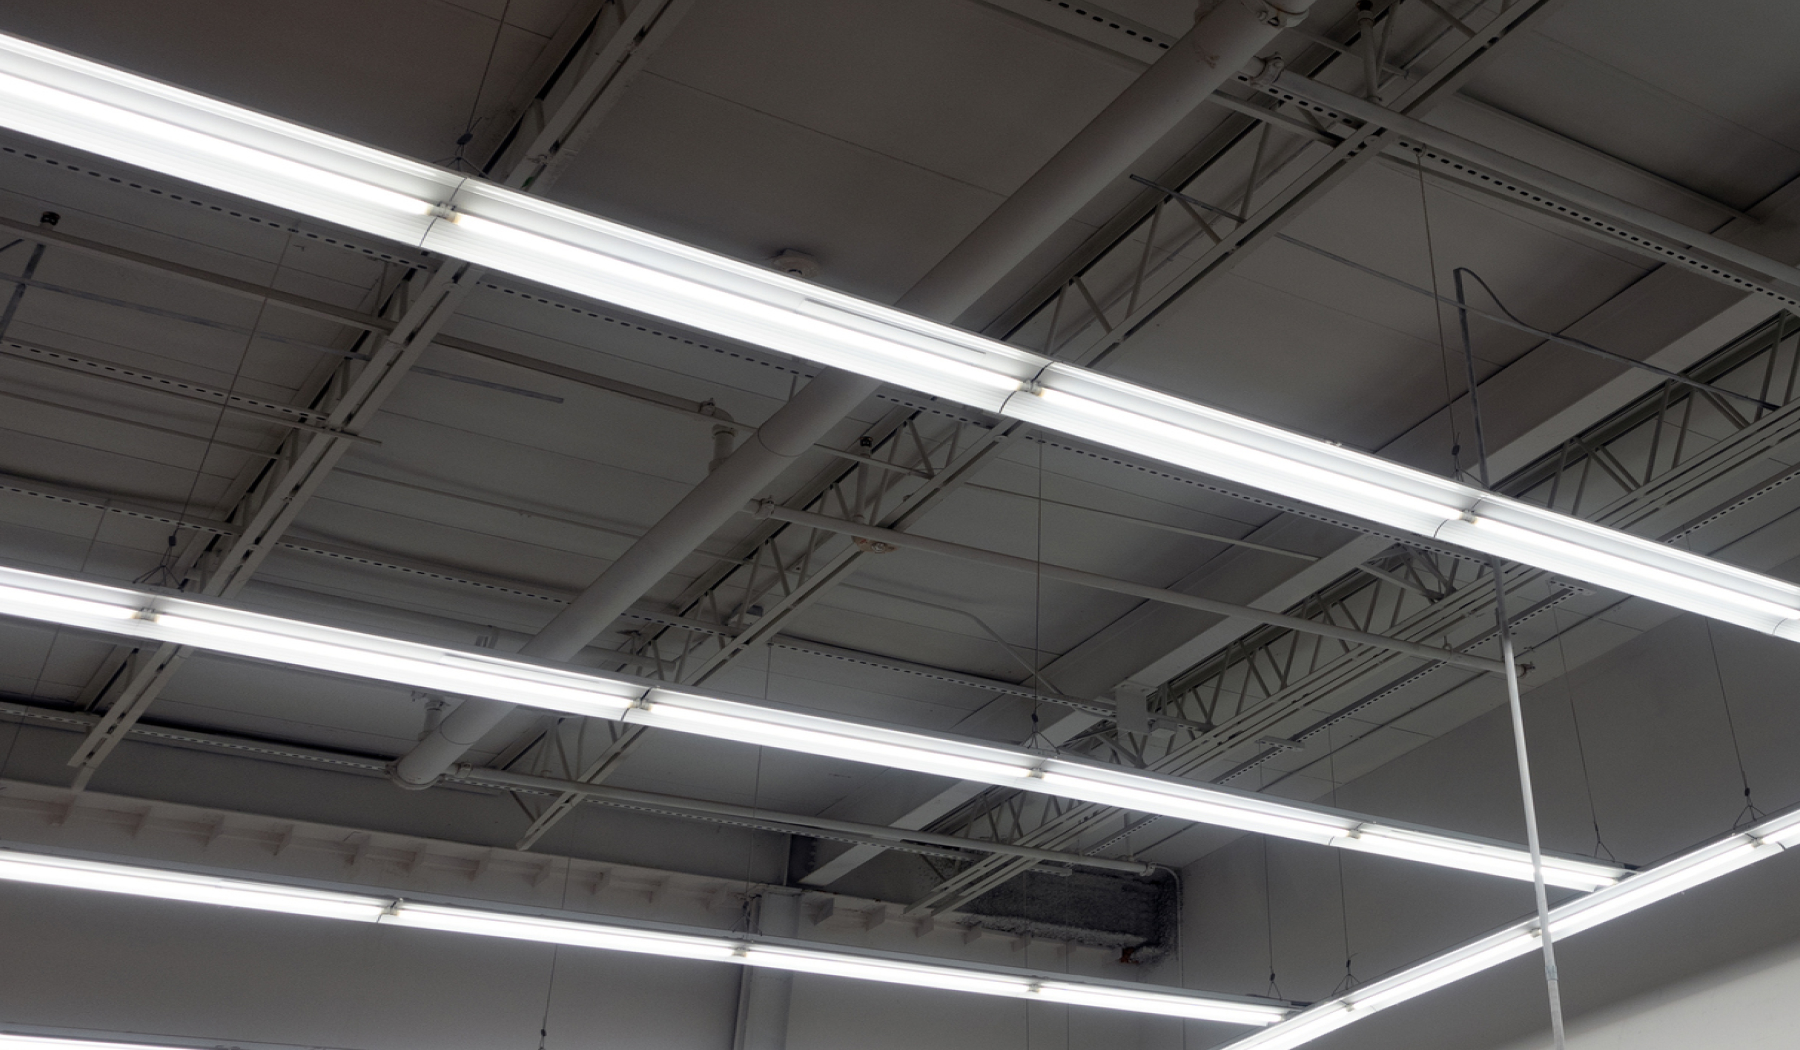 LED lighting upgrade in grocery store.